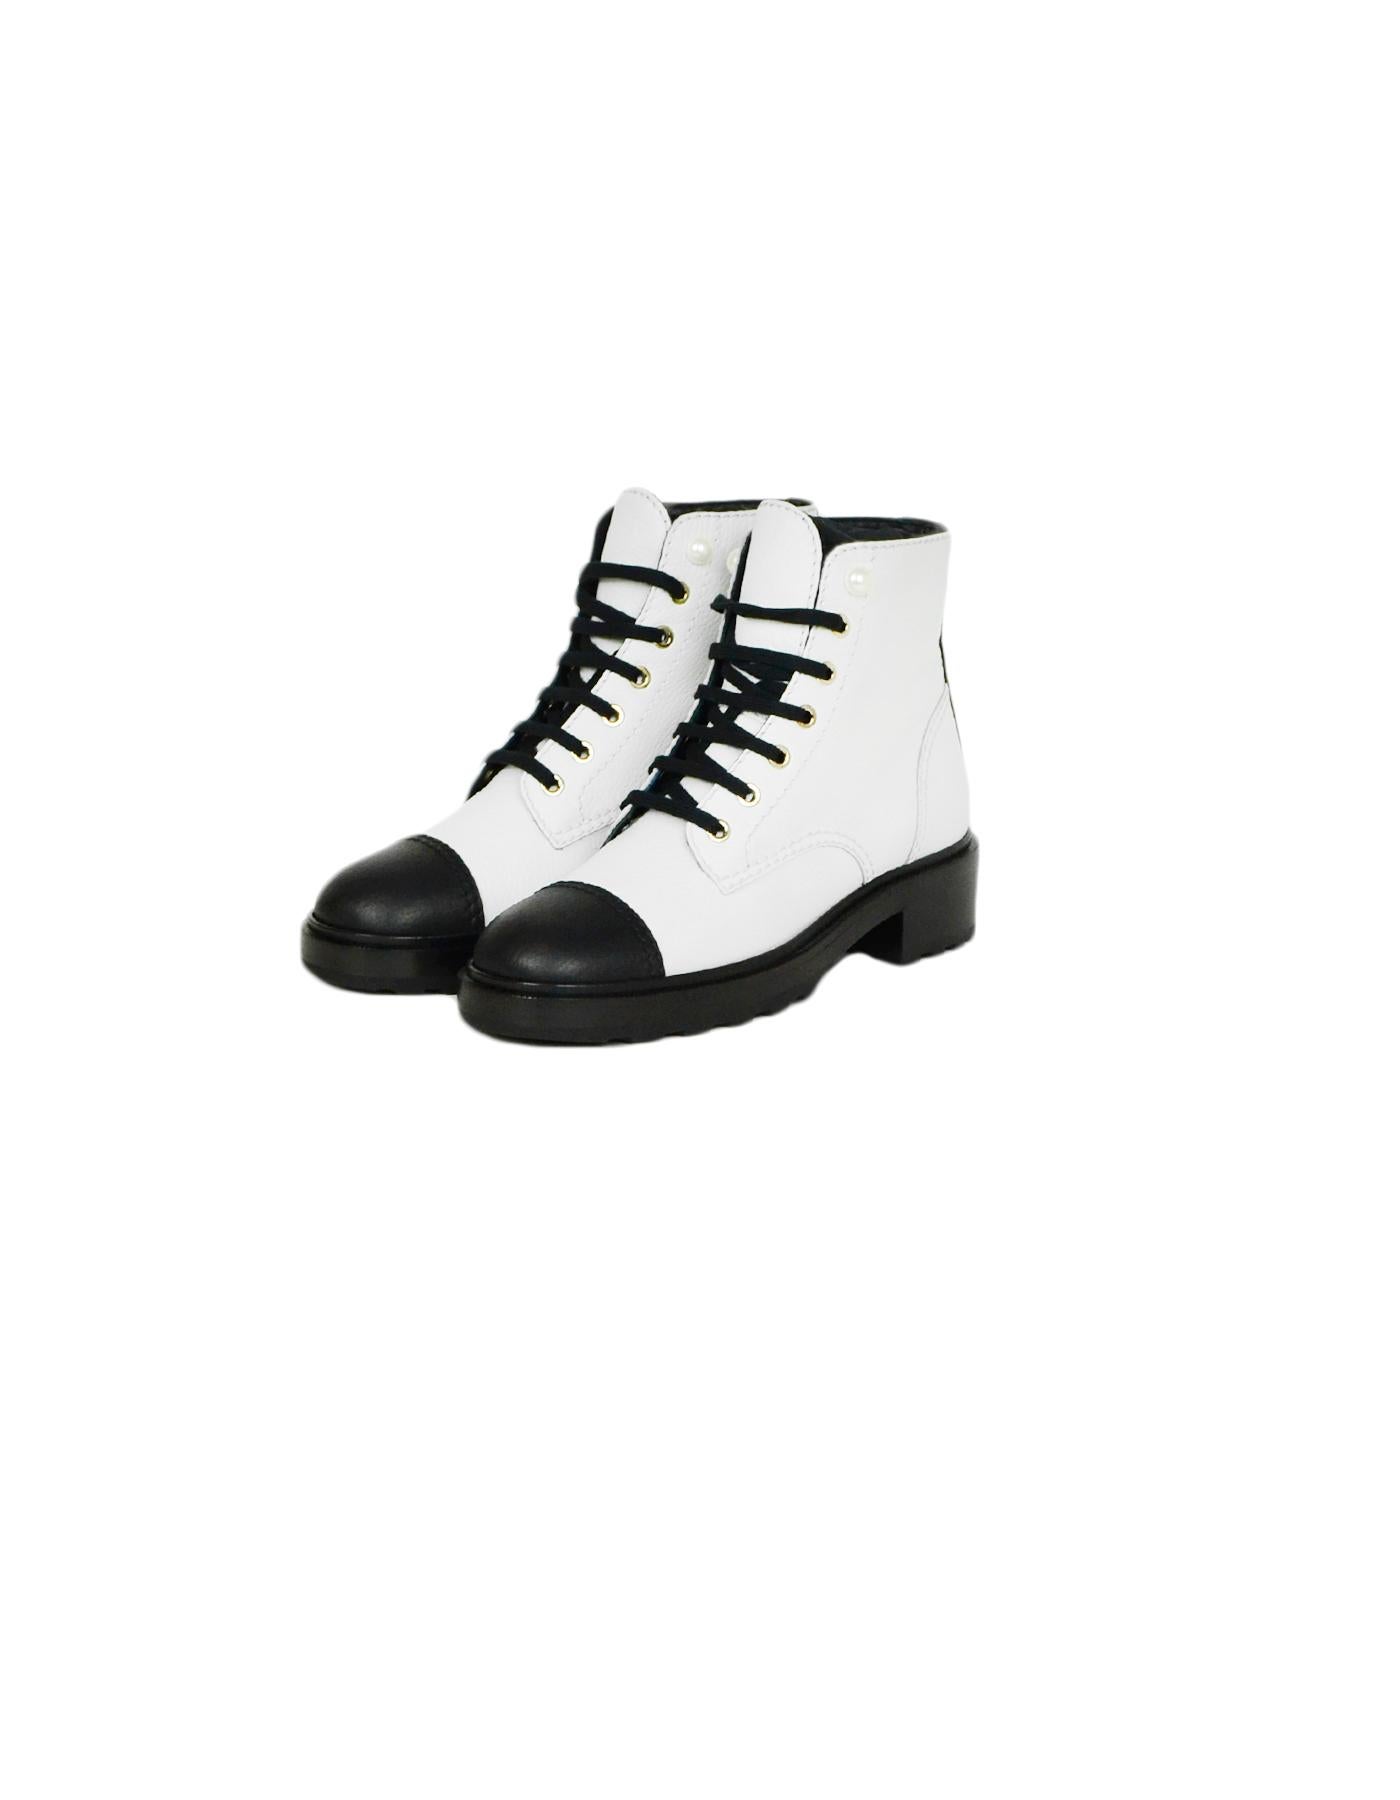 Chanel 2019 White Black Leather CC Lace Up Boots sz 39

Made In: Italy
Year of Production: 2019
Color: White, Black
Hardware: Silvertone
Materials: Leather
Closure/Opening: Lace-up
Overall Condition: Excellent pre-owned condition, like new
Estimated